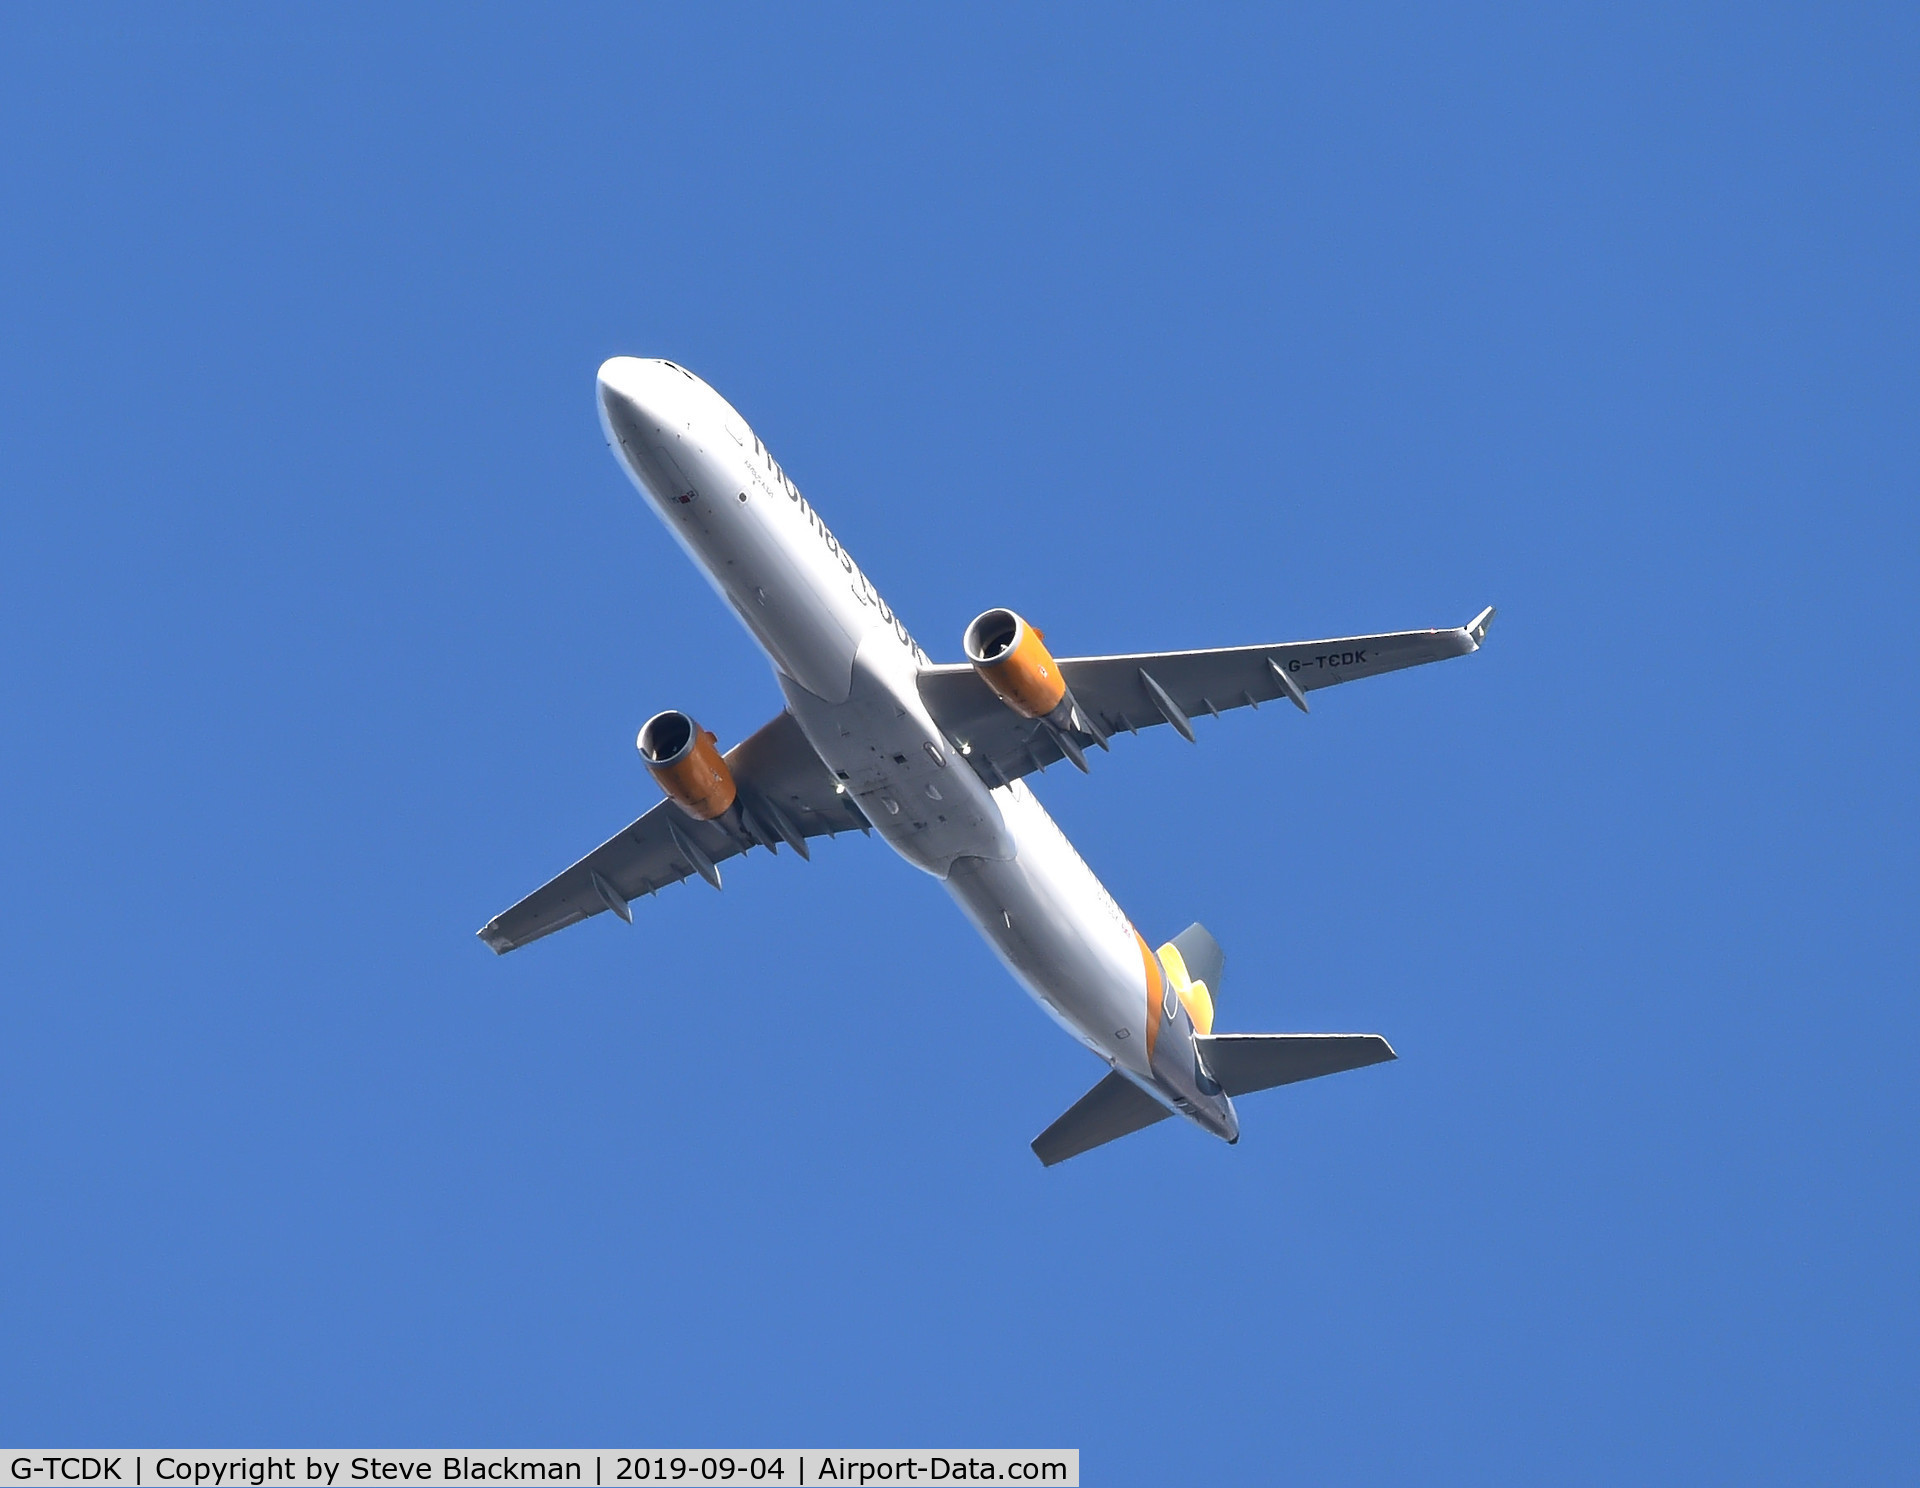 G-TCDK, 2015 Airbus A321-211 C/N 6548, Over Napton, Warwickshire, UK. On approach to Birmingham airport.